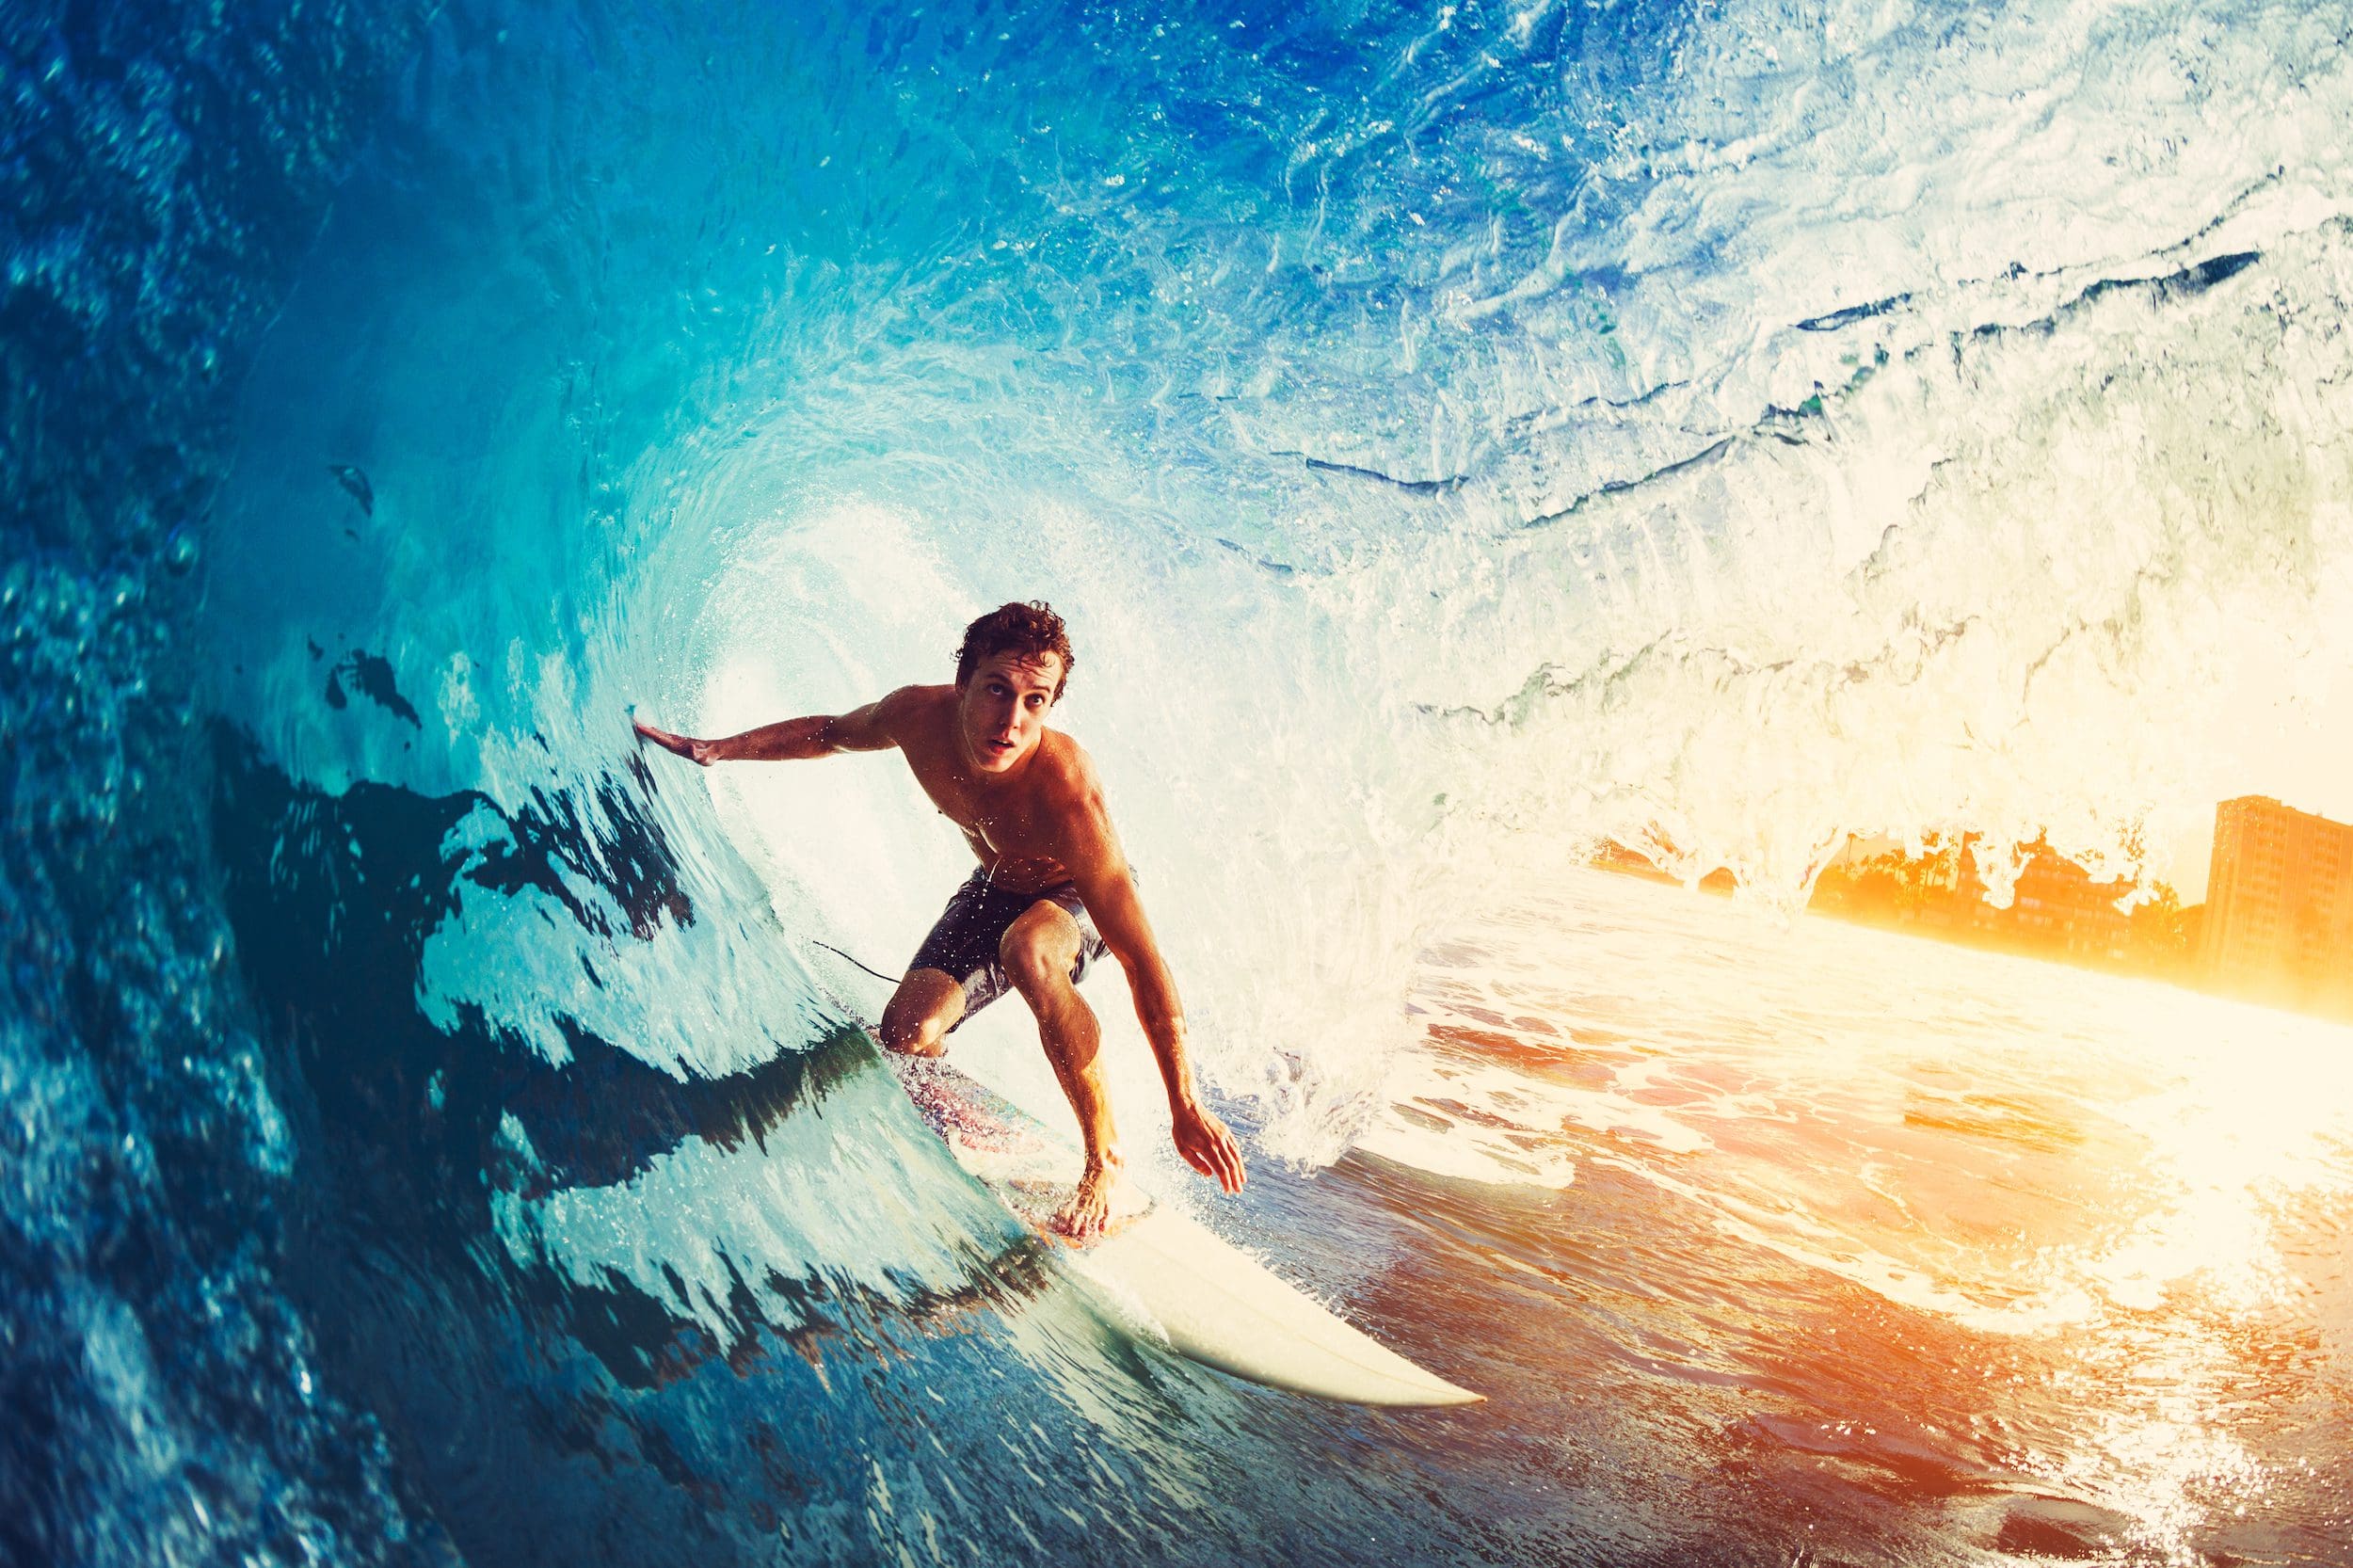 When is the surfing wave coming?